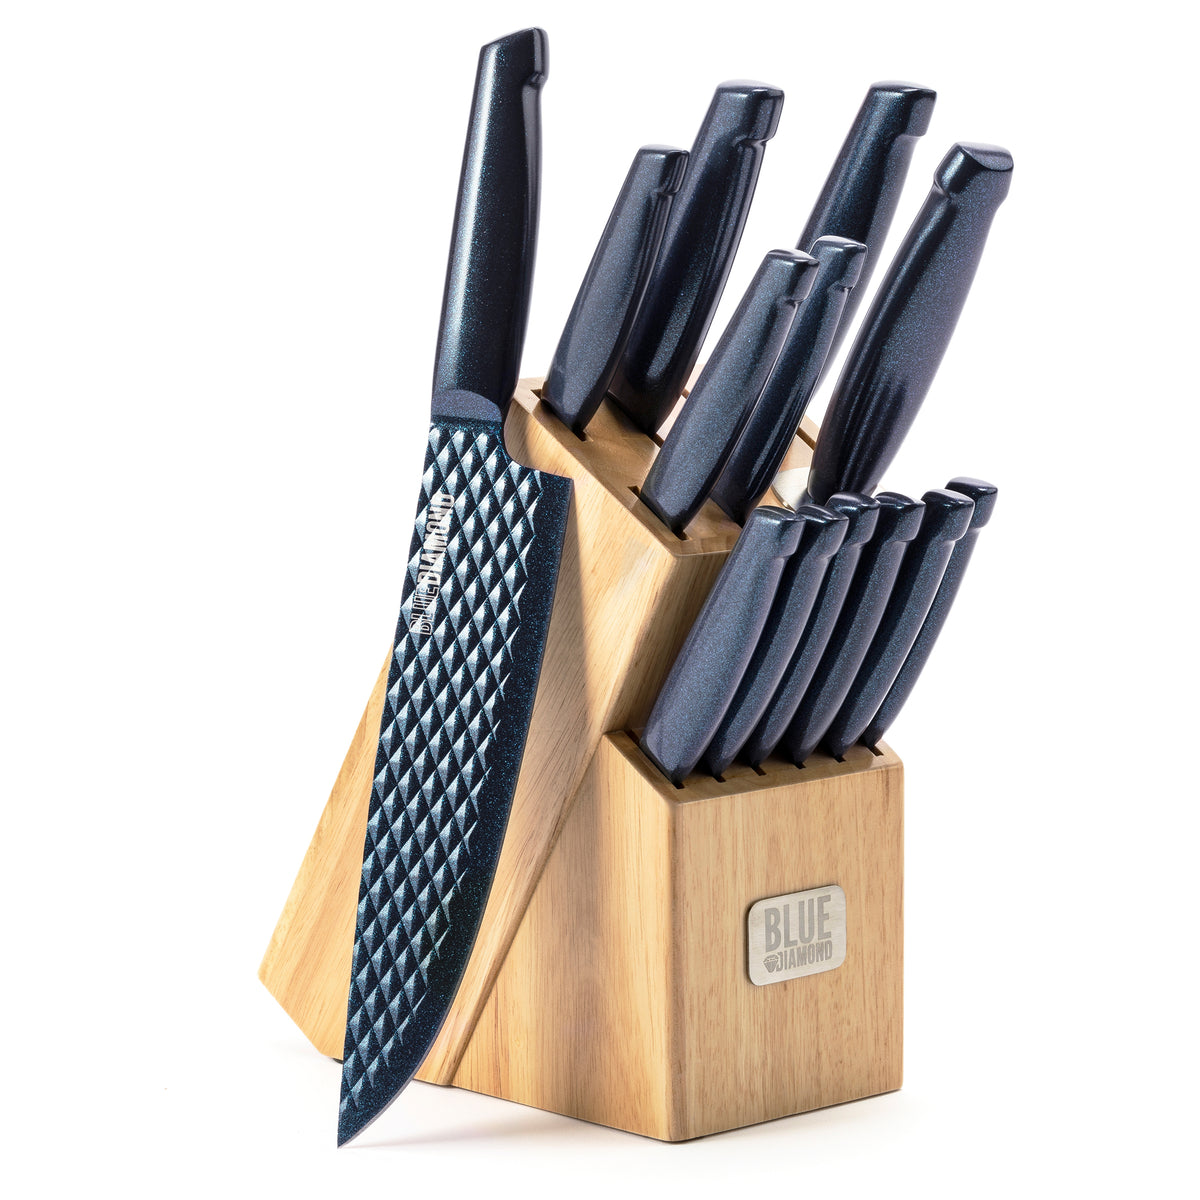 AiDot Syvio Kitchen Knife Set - 14 Pieces with Built-in Sharpener